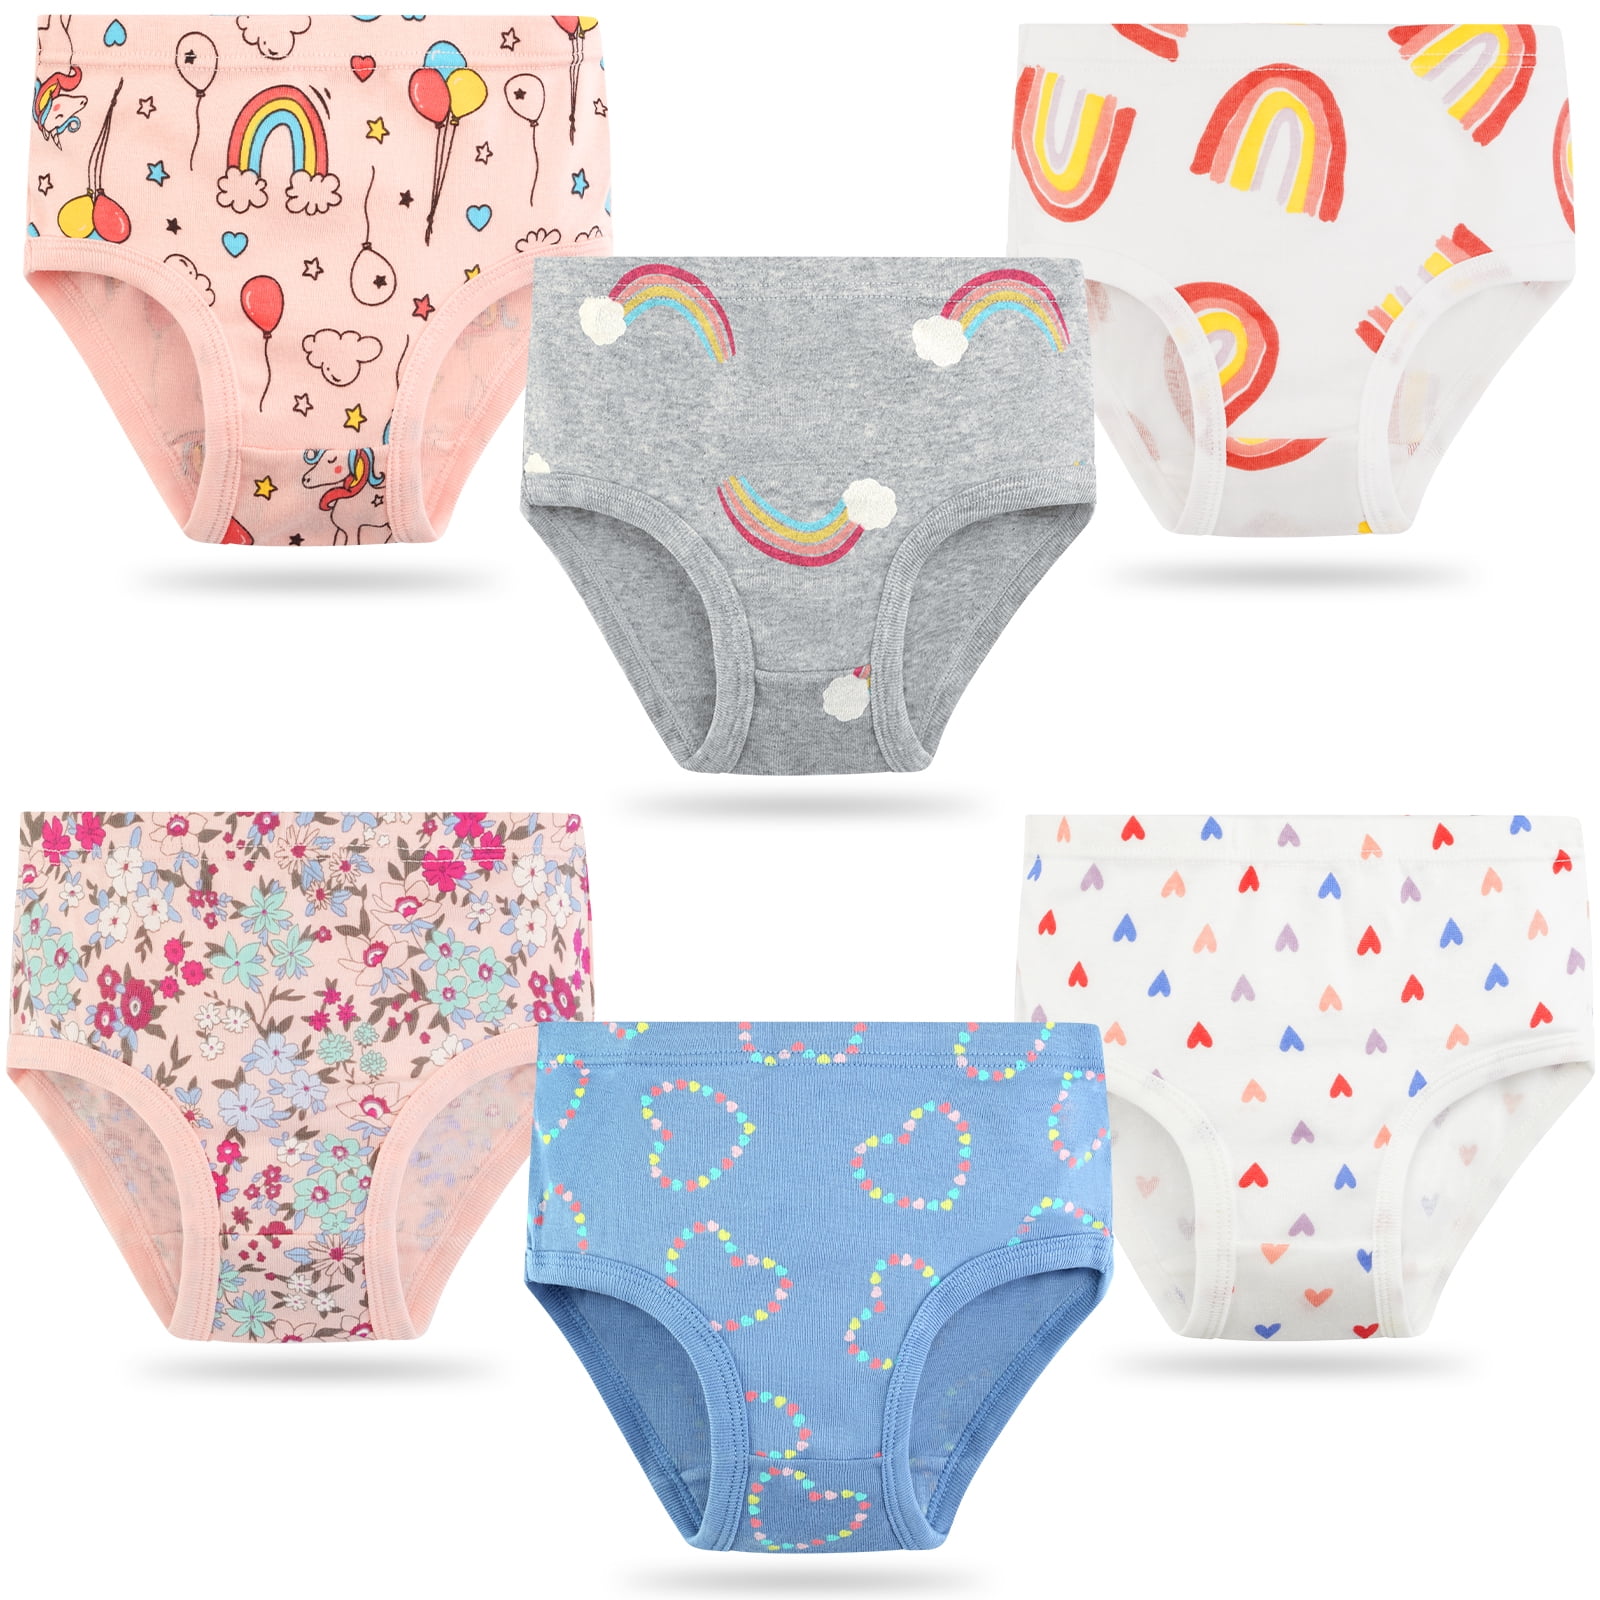 Jeccie Kids Baby Girls Lovely 100% Cotton Briefs, Soft Underwear 6-Pack,#A  for 6-7 Years 